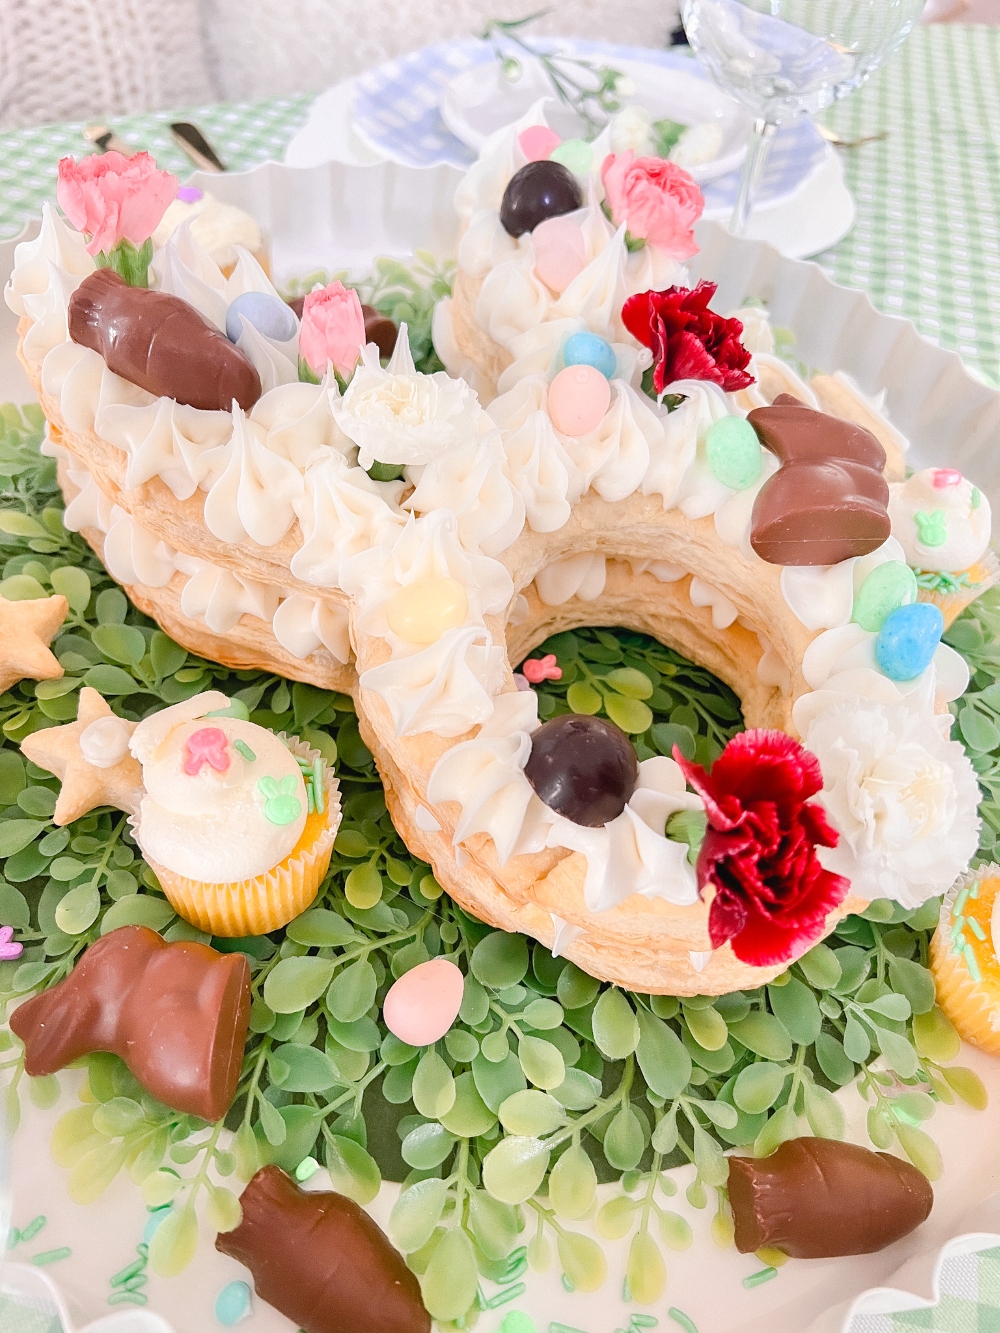 Bunny Puff Pastry Easter Tart. Layers of flaky crust and sweet cream cheese frosting make beautiful dessert  that also makes an edible centerpiece for your holiday table!